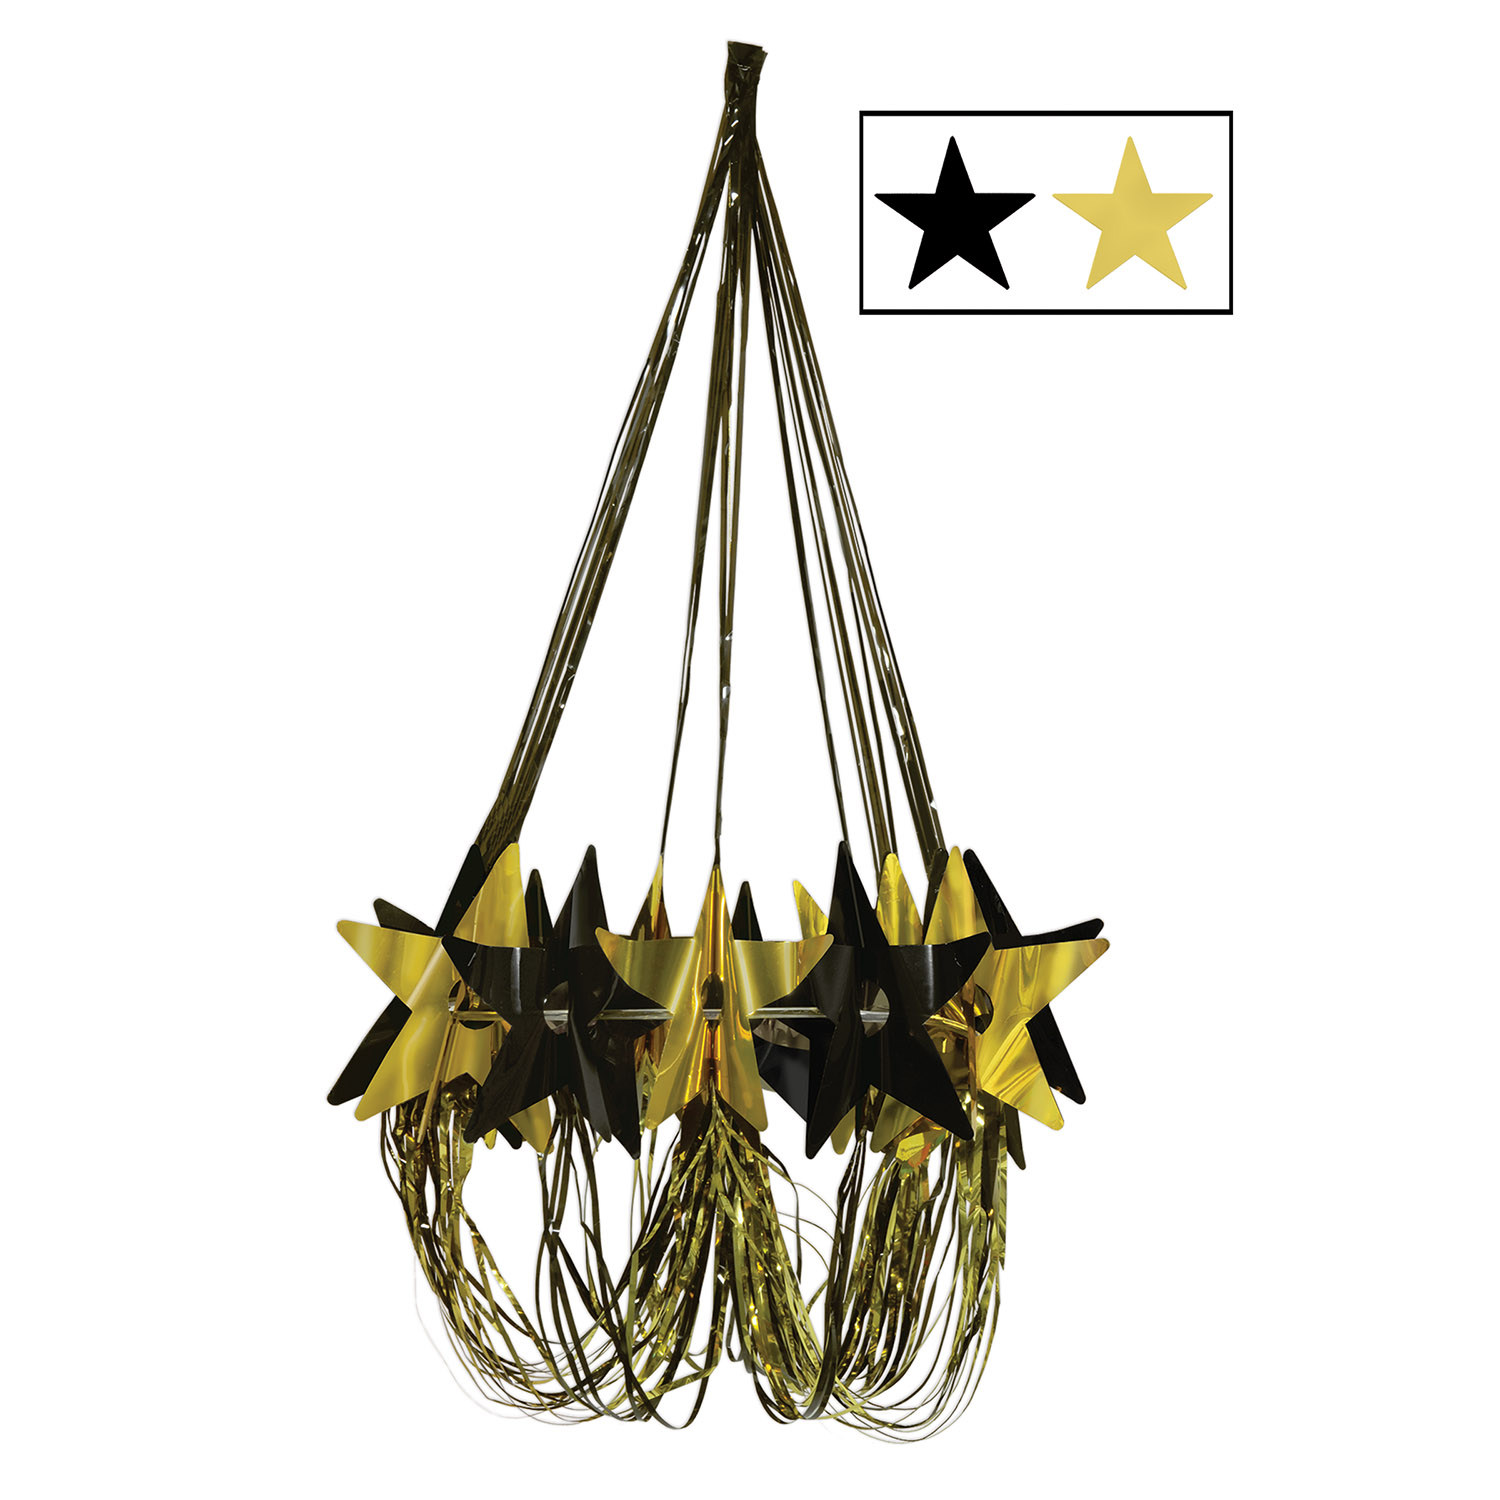 Chandelier decoration with black and gold metallic material including stars.